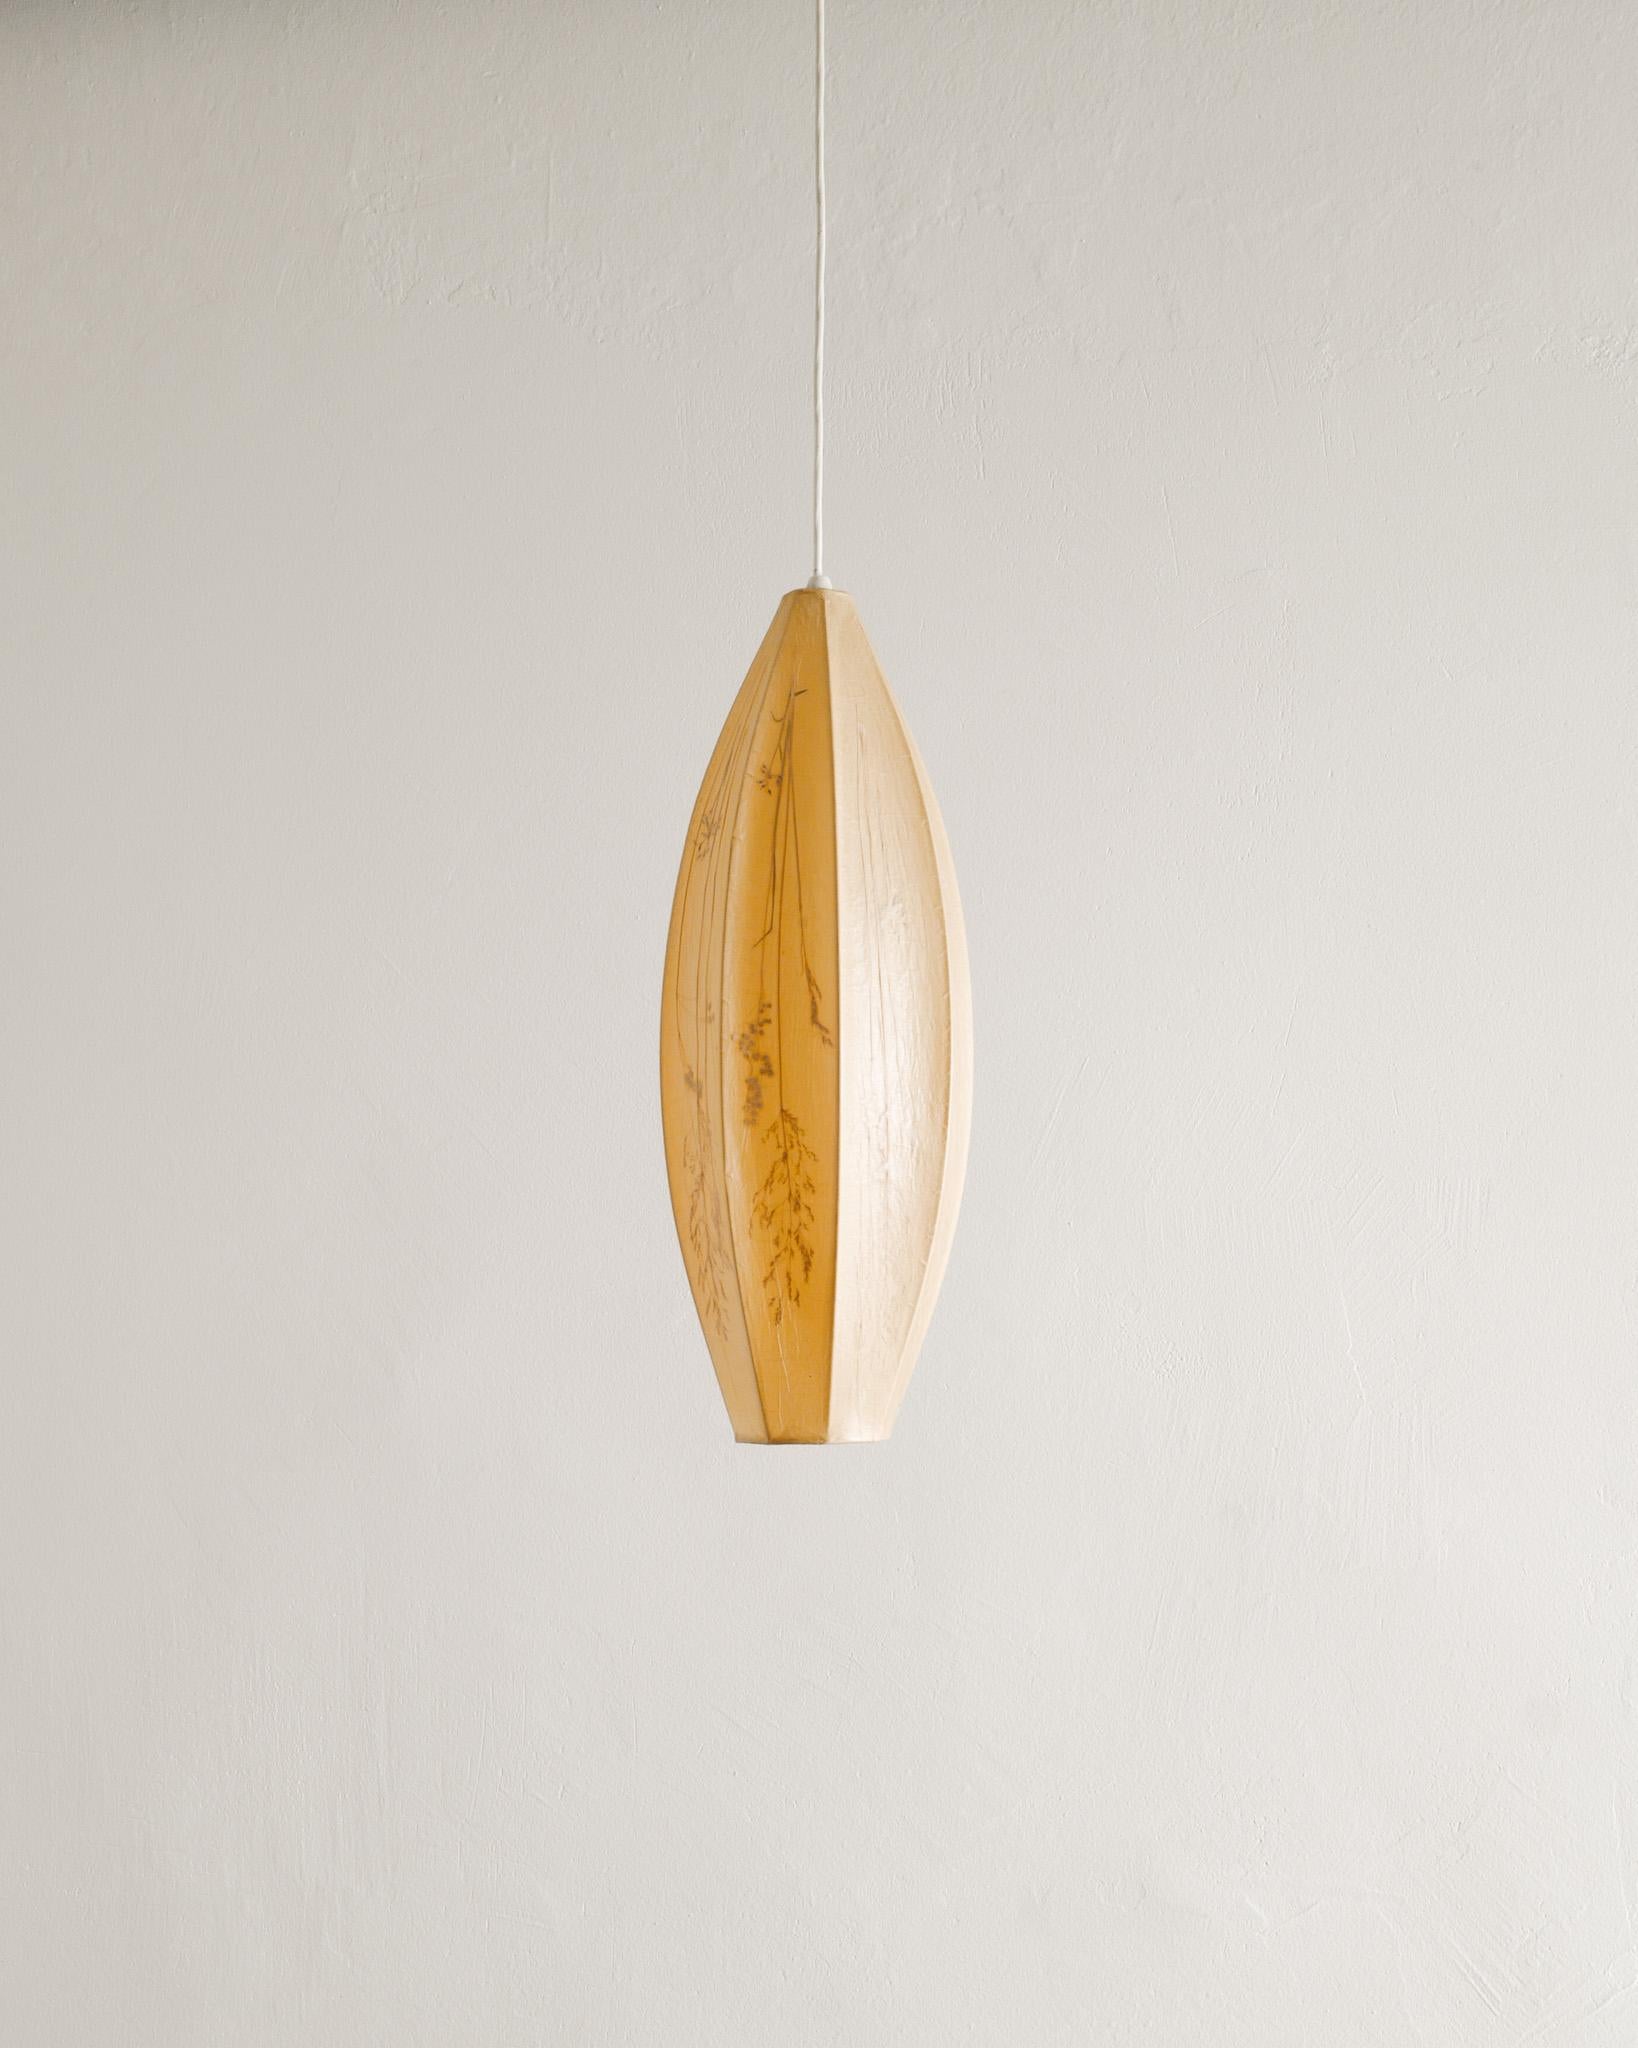 Very rare Swedish mid century paper ceiling pendant lamp with pressed grass inlay by Birgitta Malmsten produced in 1950s. In good original condition.

Dimensions: H: 50 cm / 19.70